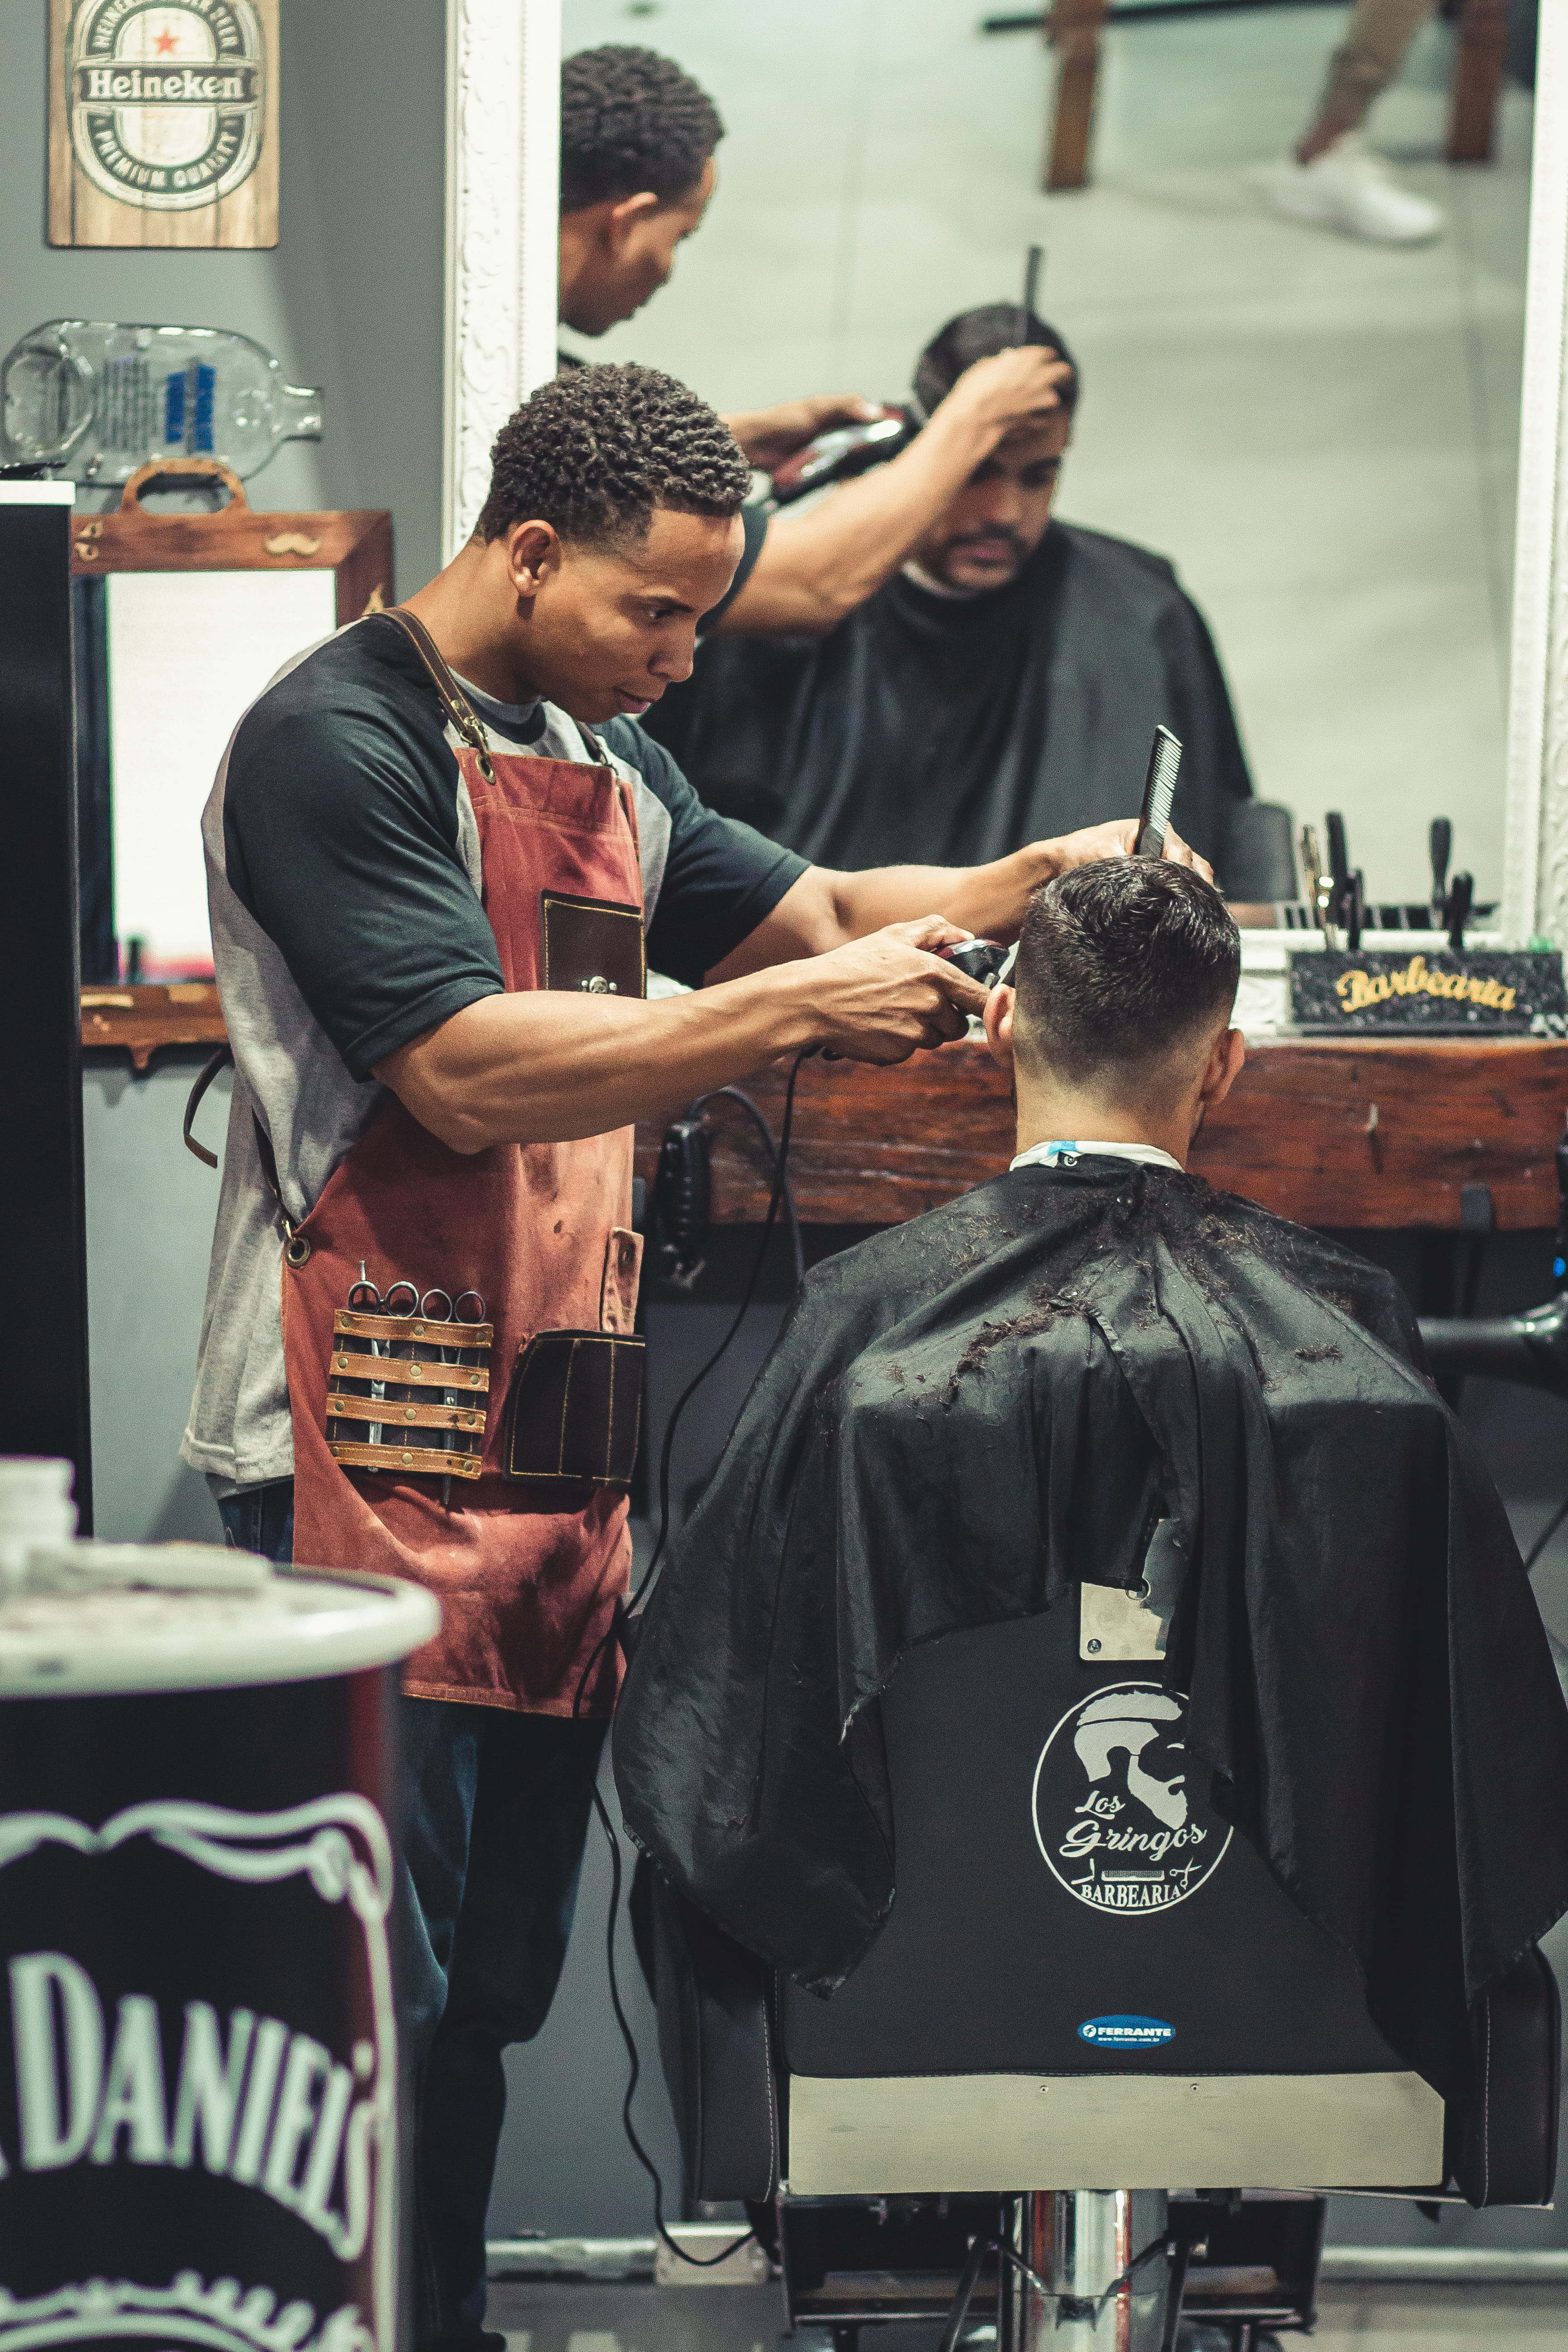 Person Cutting Hair of Man, barber, barbershop, facial expression